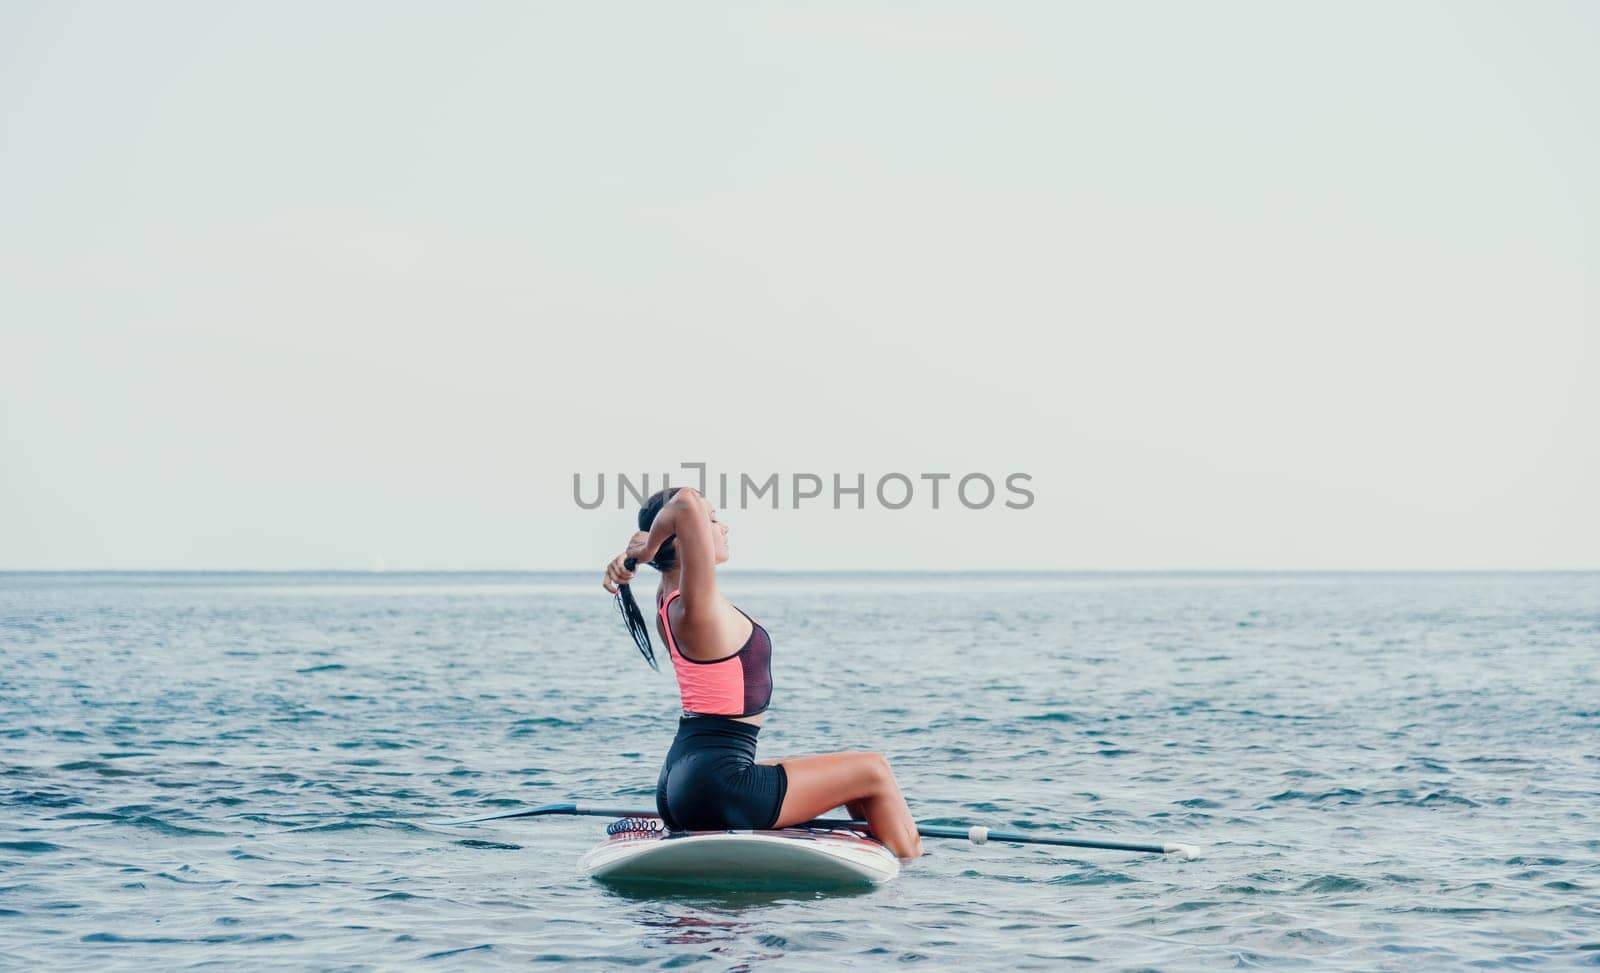 Sea woman sup. Silhouette of happy young woman in pink bikini, surfing on SUP board, confident paddling through water surface. Idyllic sunset. Active lifestyle at sea or river by panophotograph